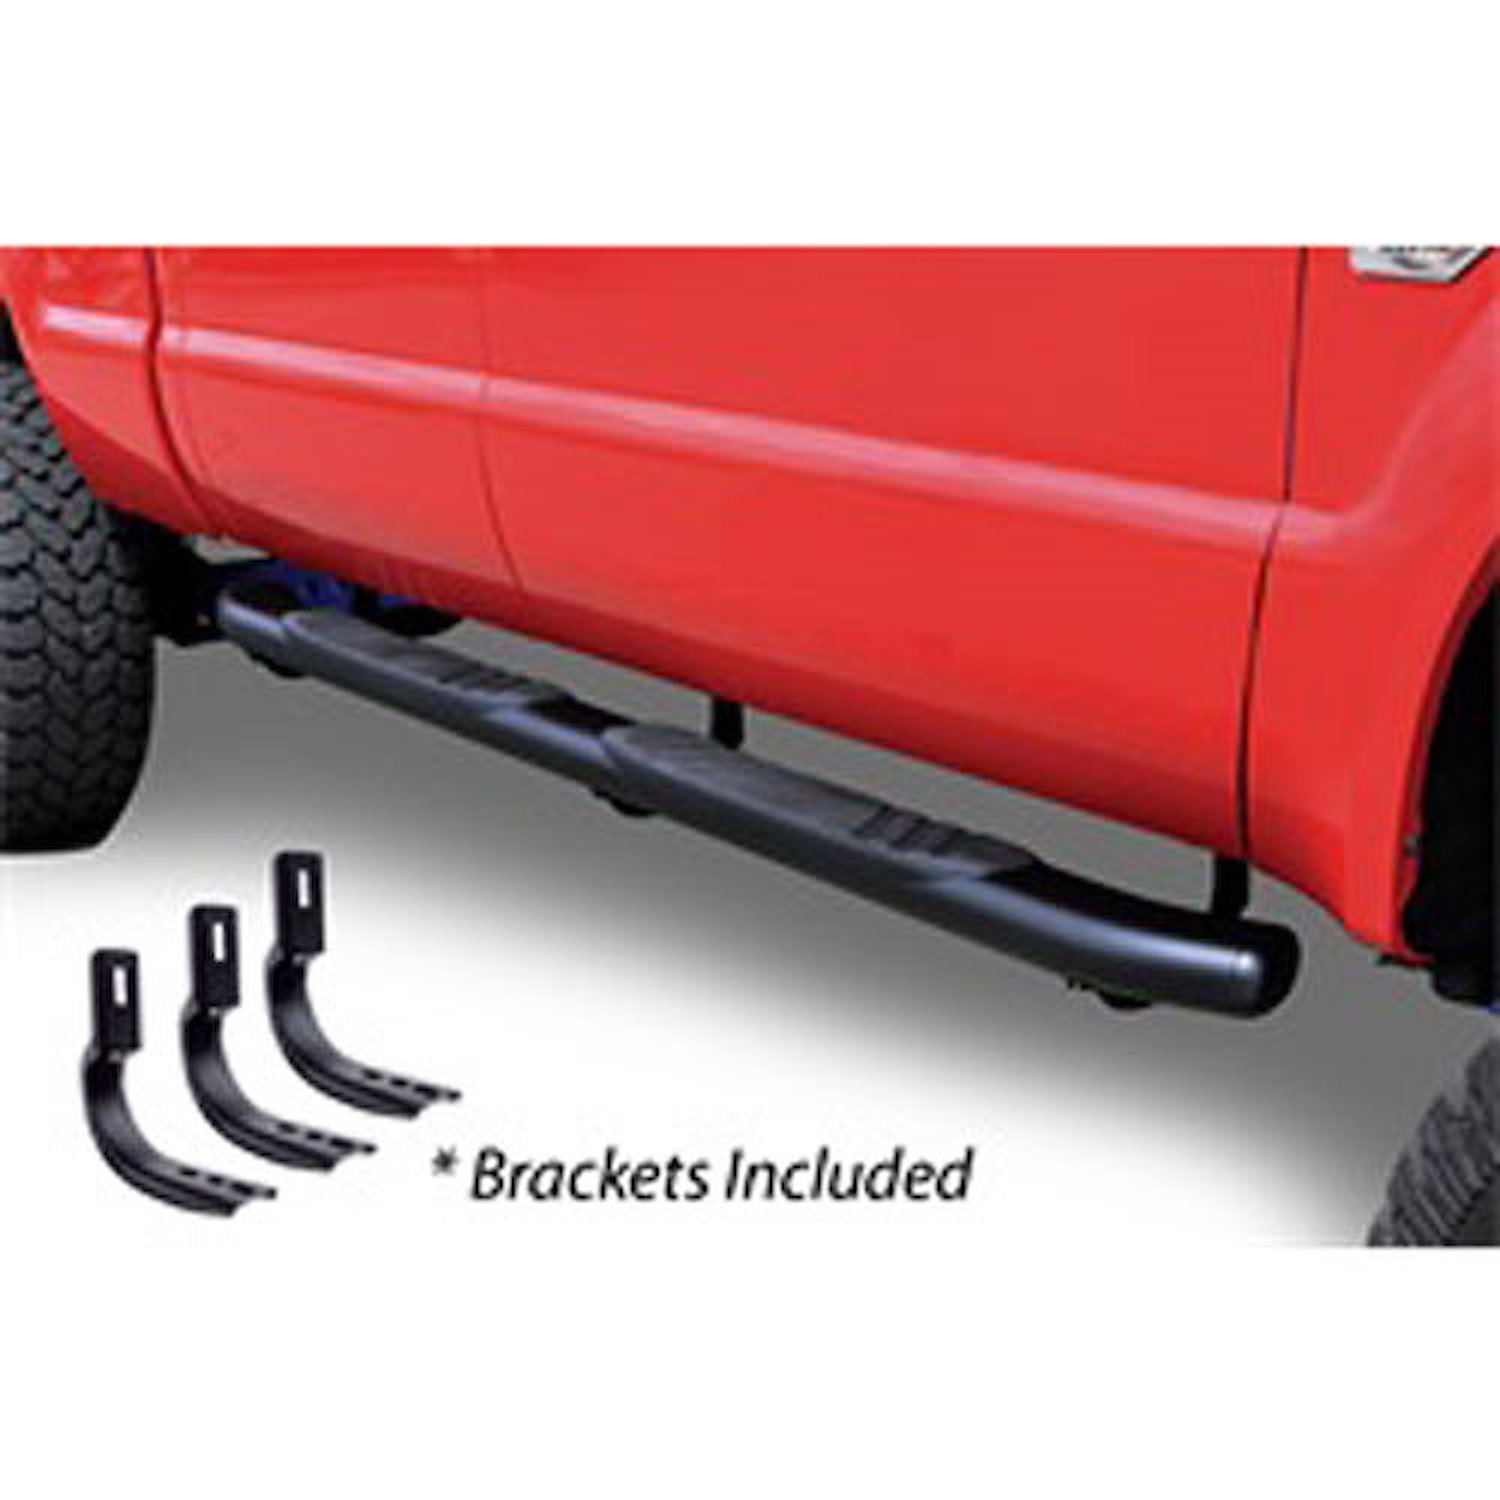 5" OE Xtreme Composite SideSteps Kit 1999-16 Ford F-250 Super Duty/F-350 Super Duty